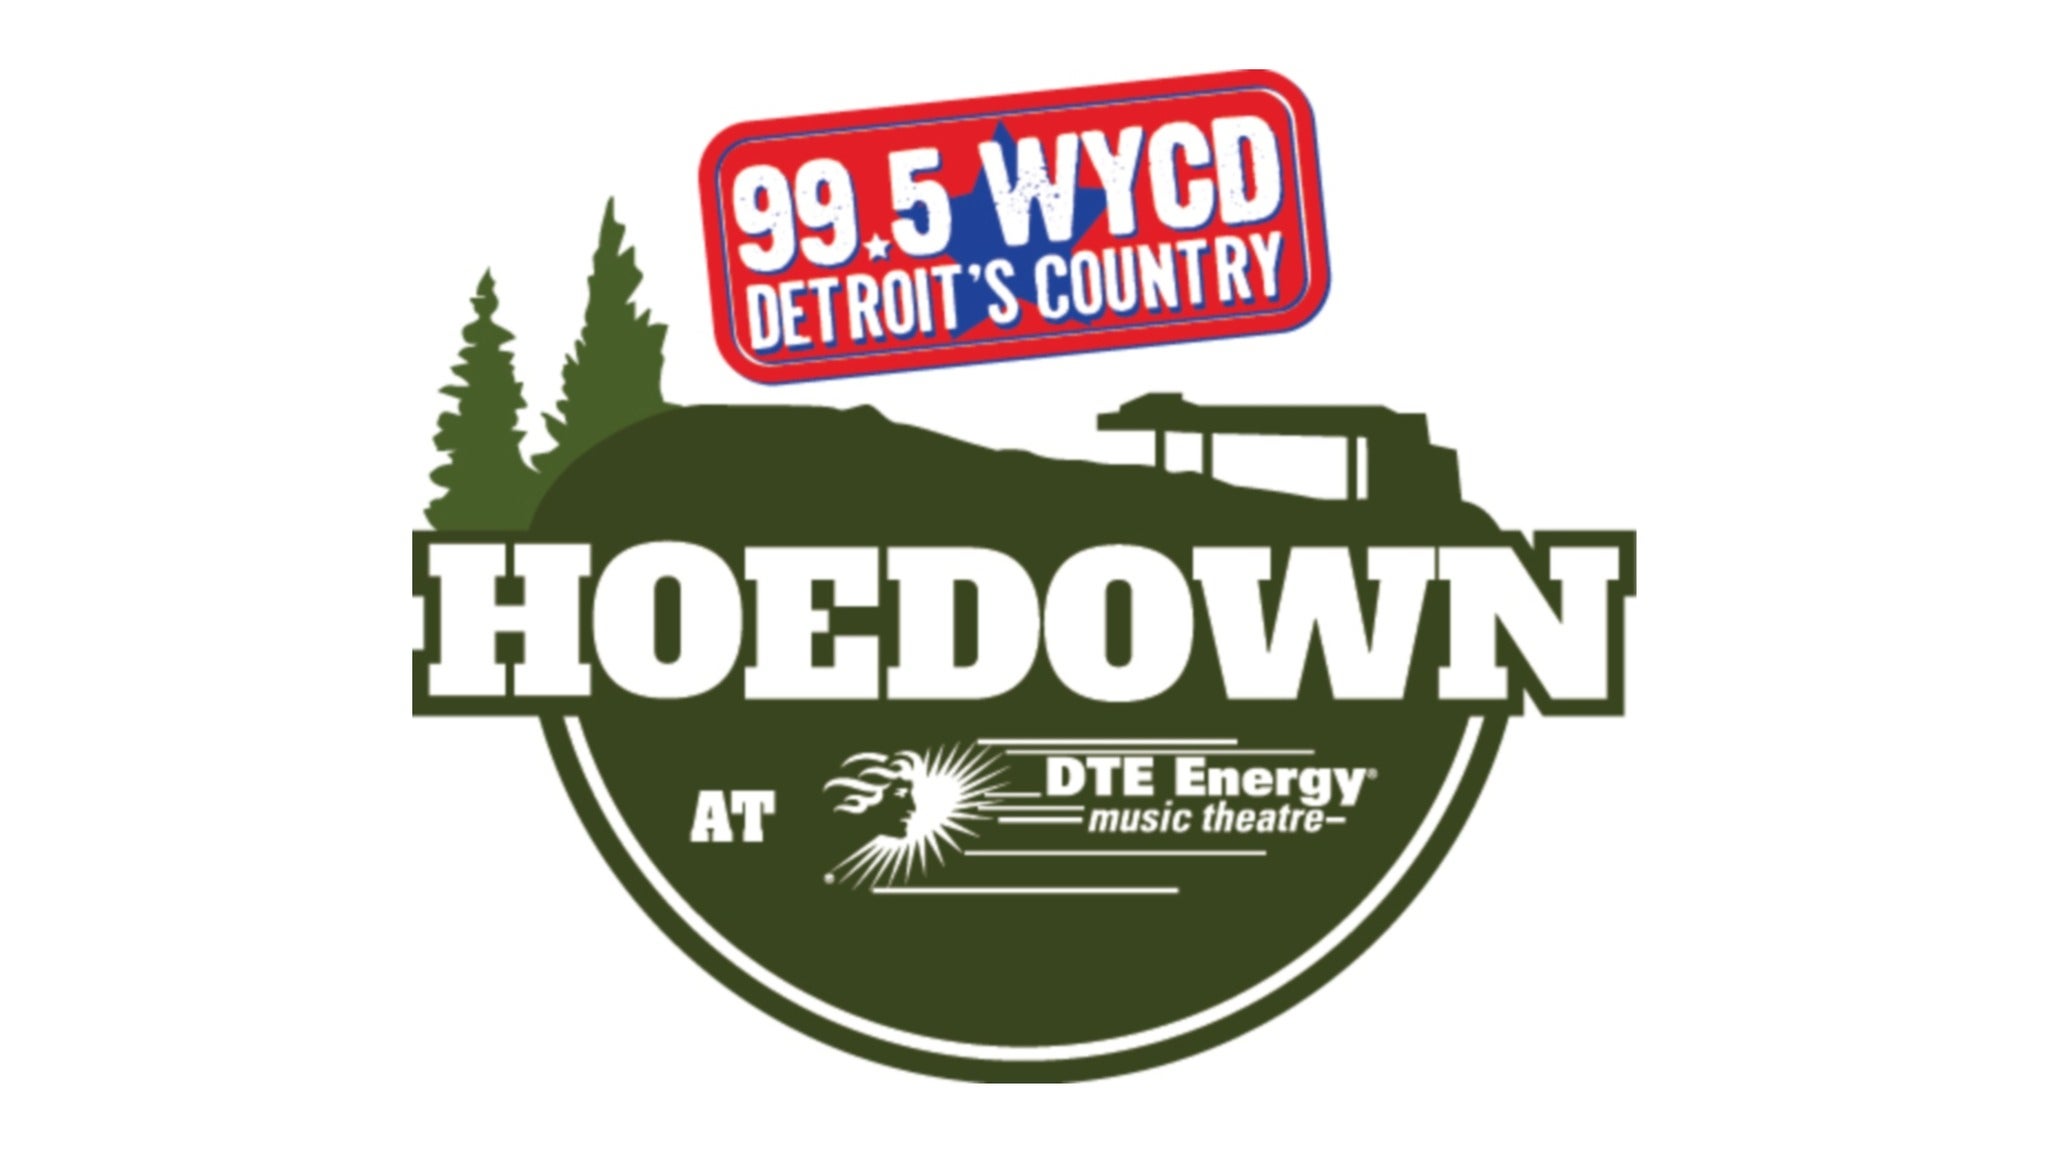 99.5 WYCD Hoedown Featuring Lady A in Clarkston event information